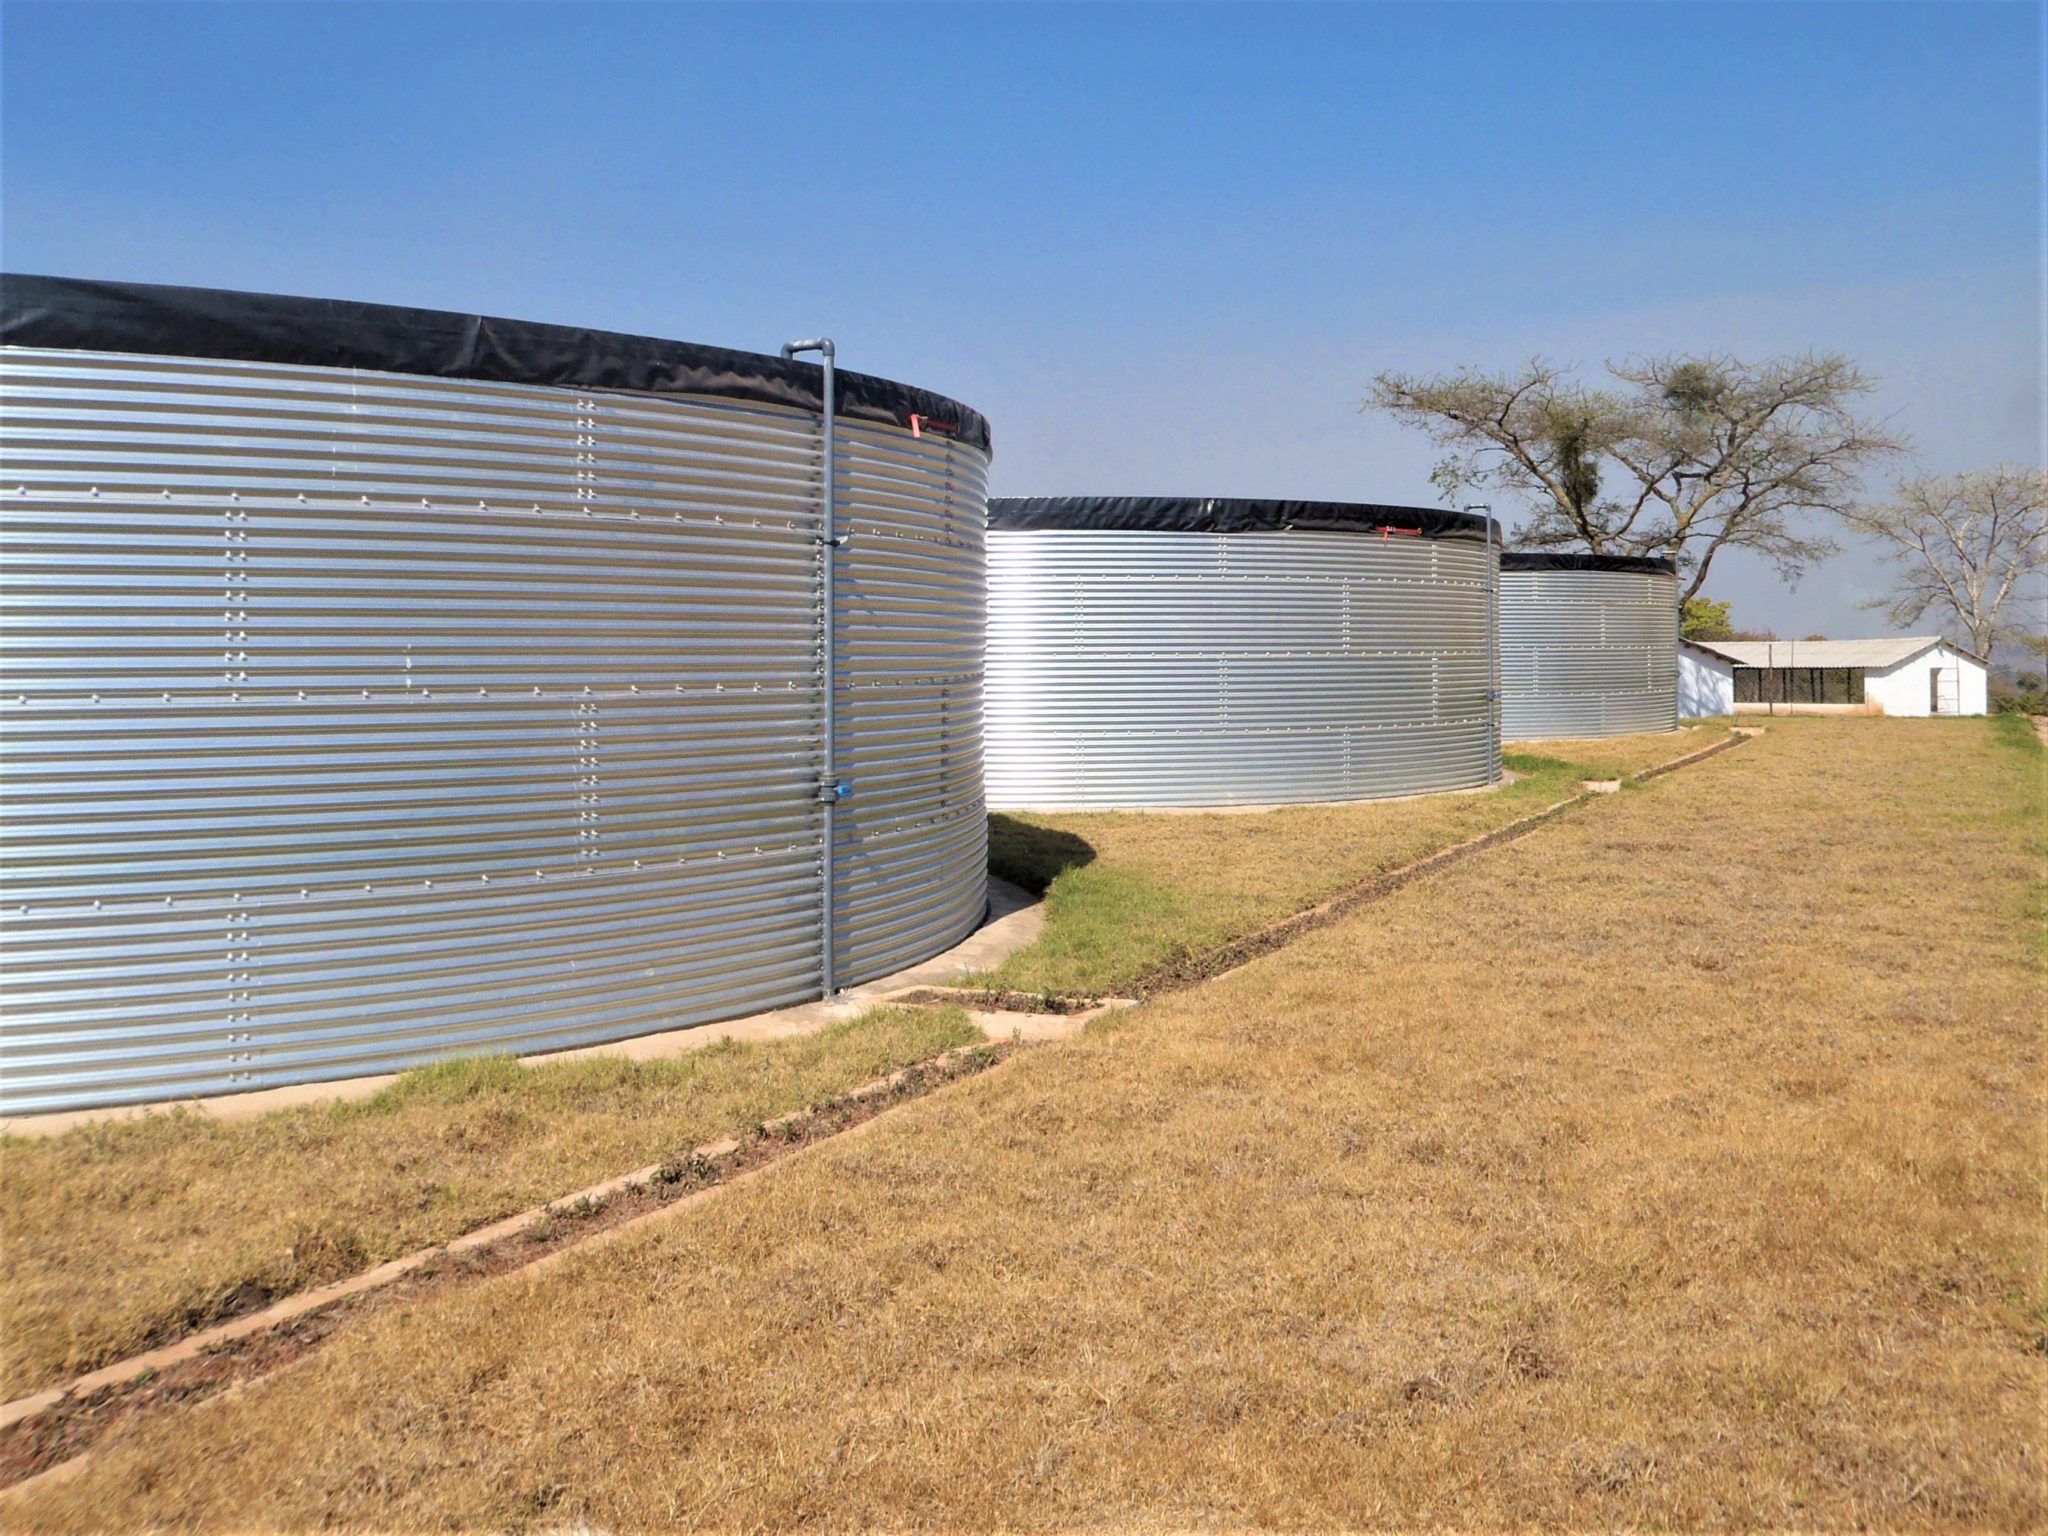 Safe and reliable water for your livestock and poultry